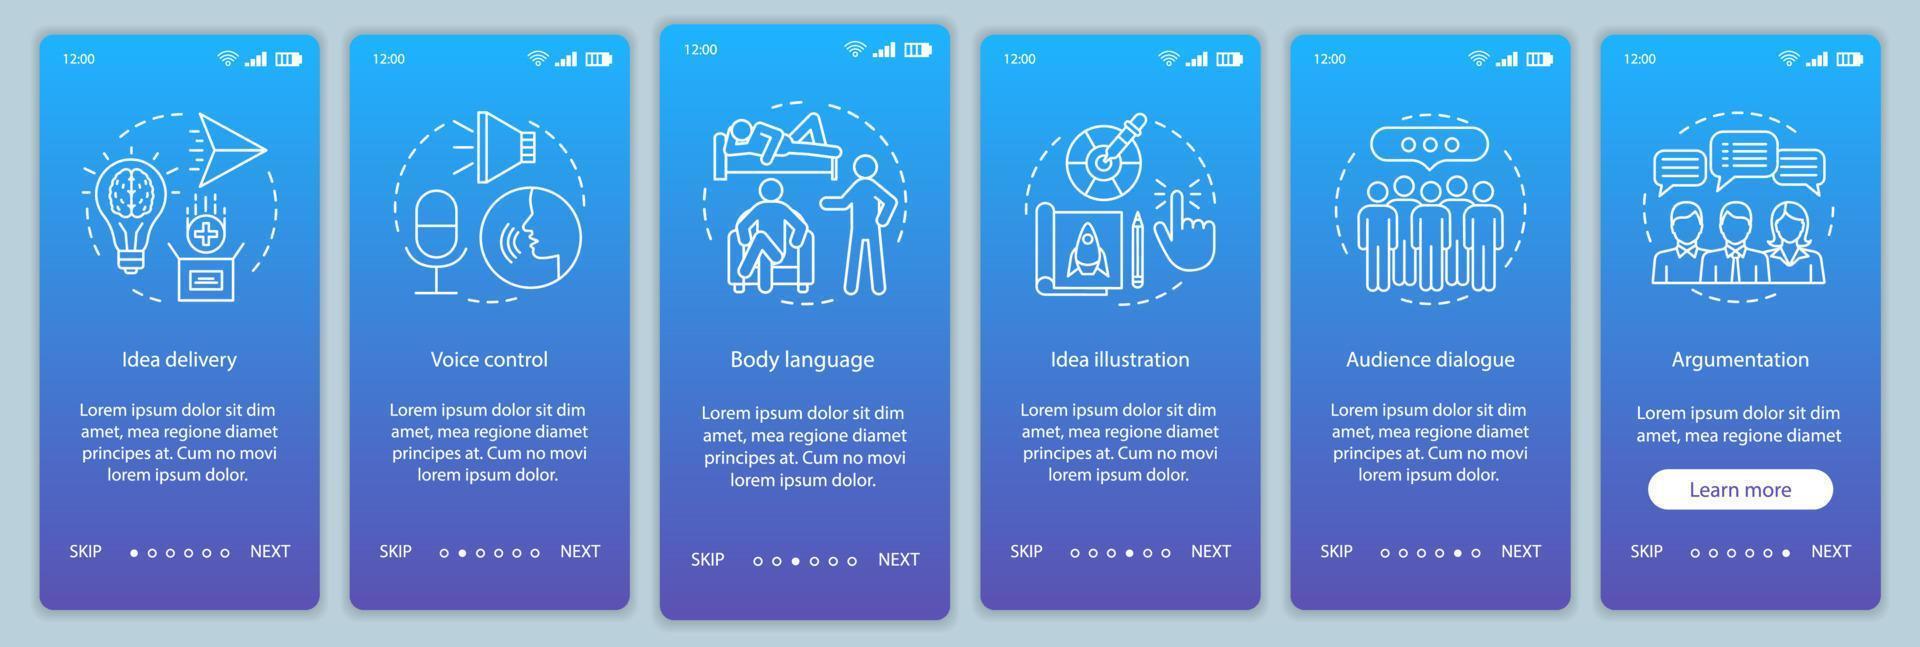 Public speaking skills onboarding mobile app page screen vector template. Voice control, body language, audience dialog. Walkthrough website steps with line icons. UX, UI, GUI smartphone interface